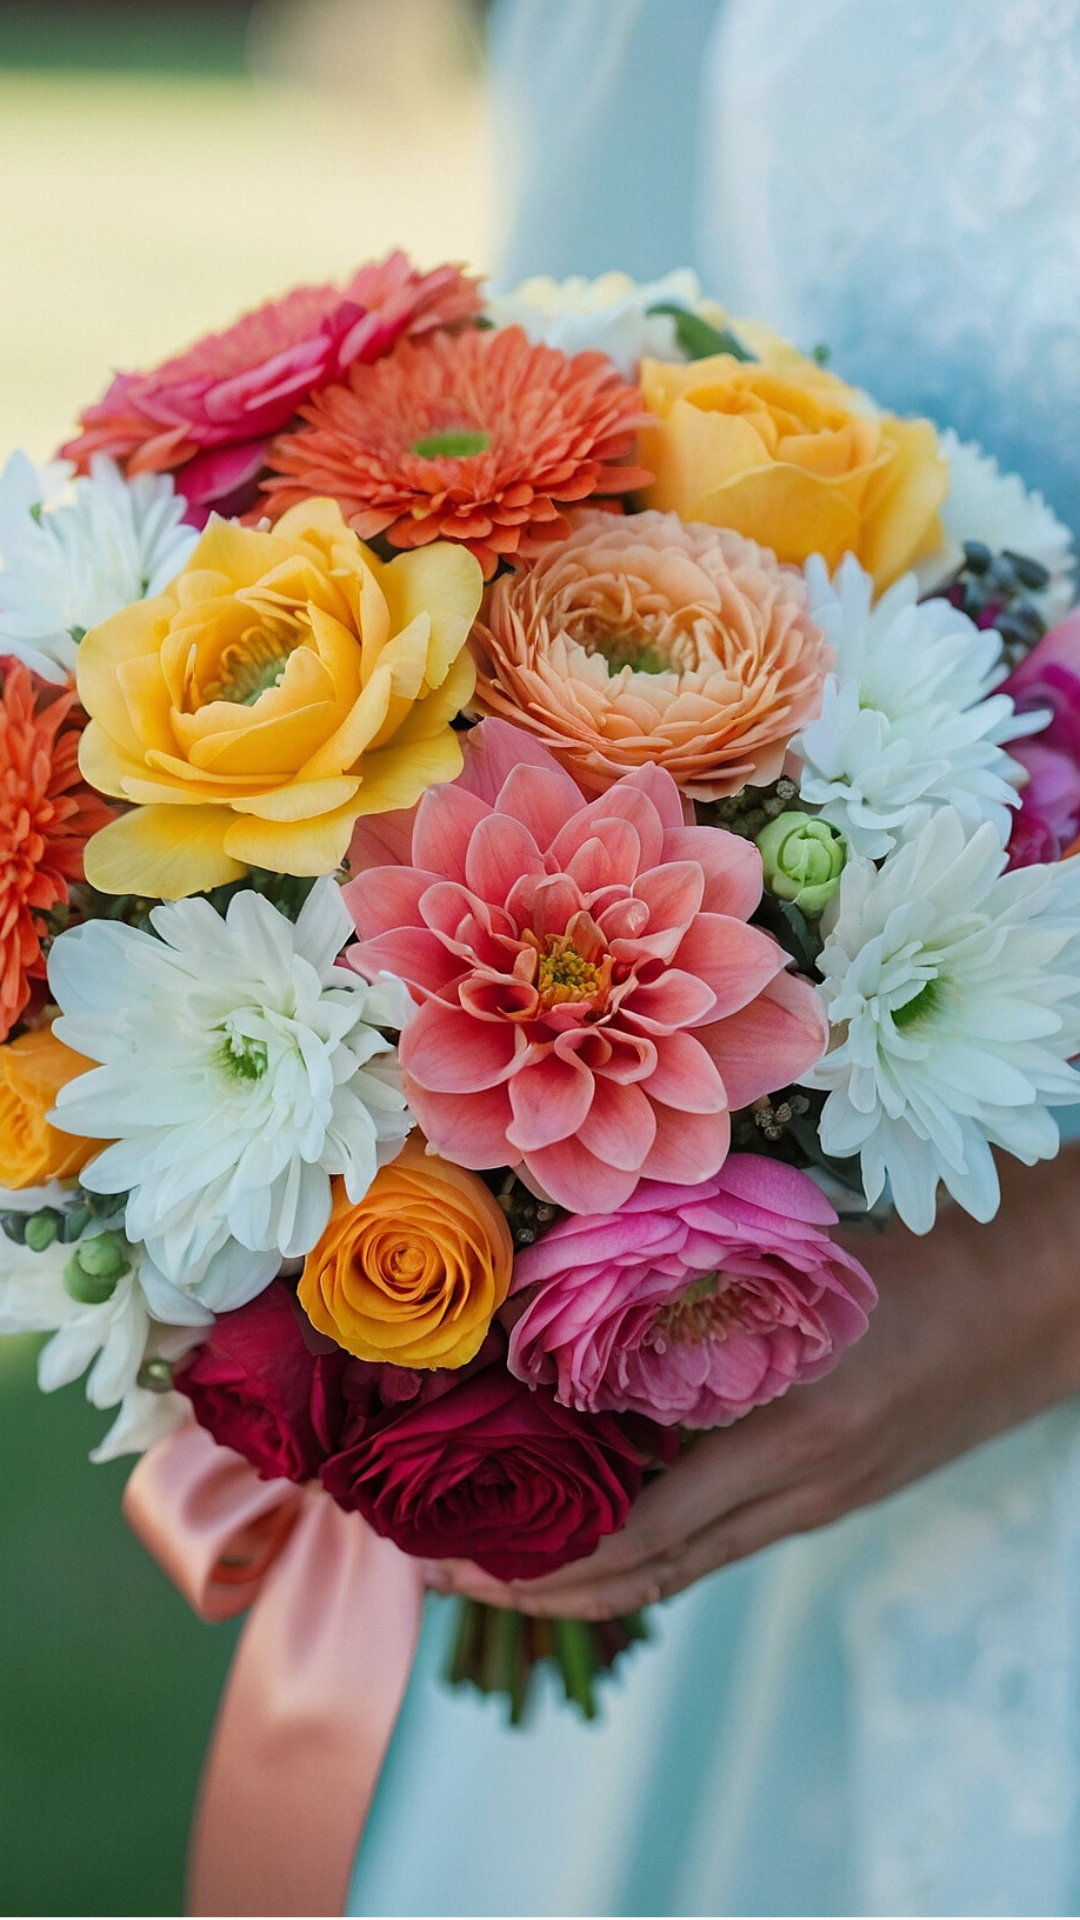 Ravishing Hand-Tied Flower Bouquet Styles for Prom 